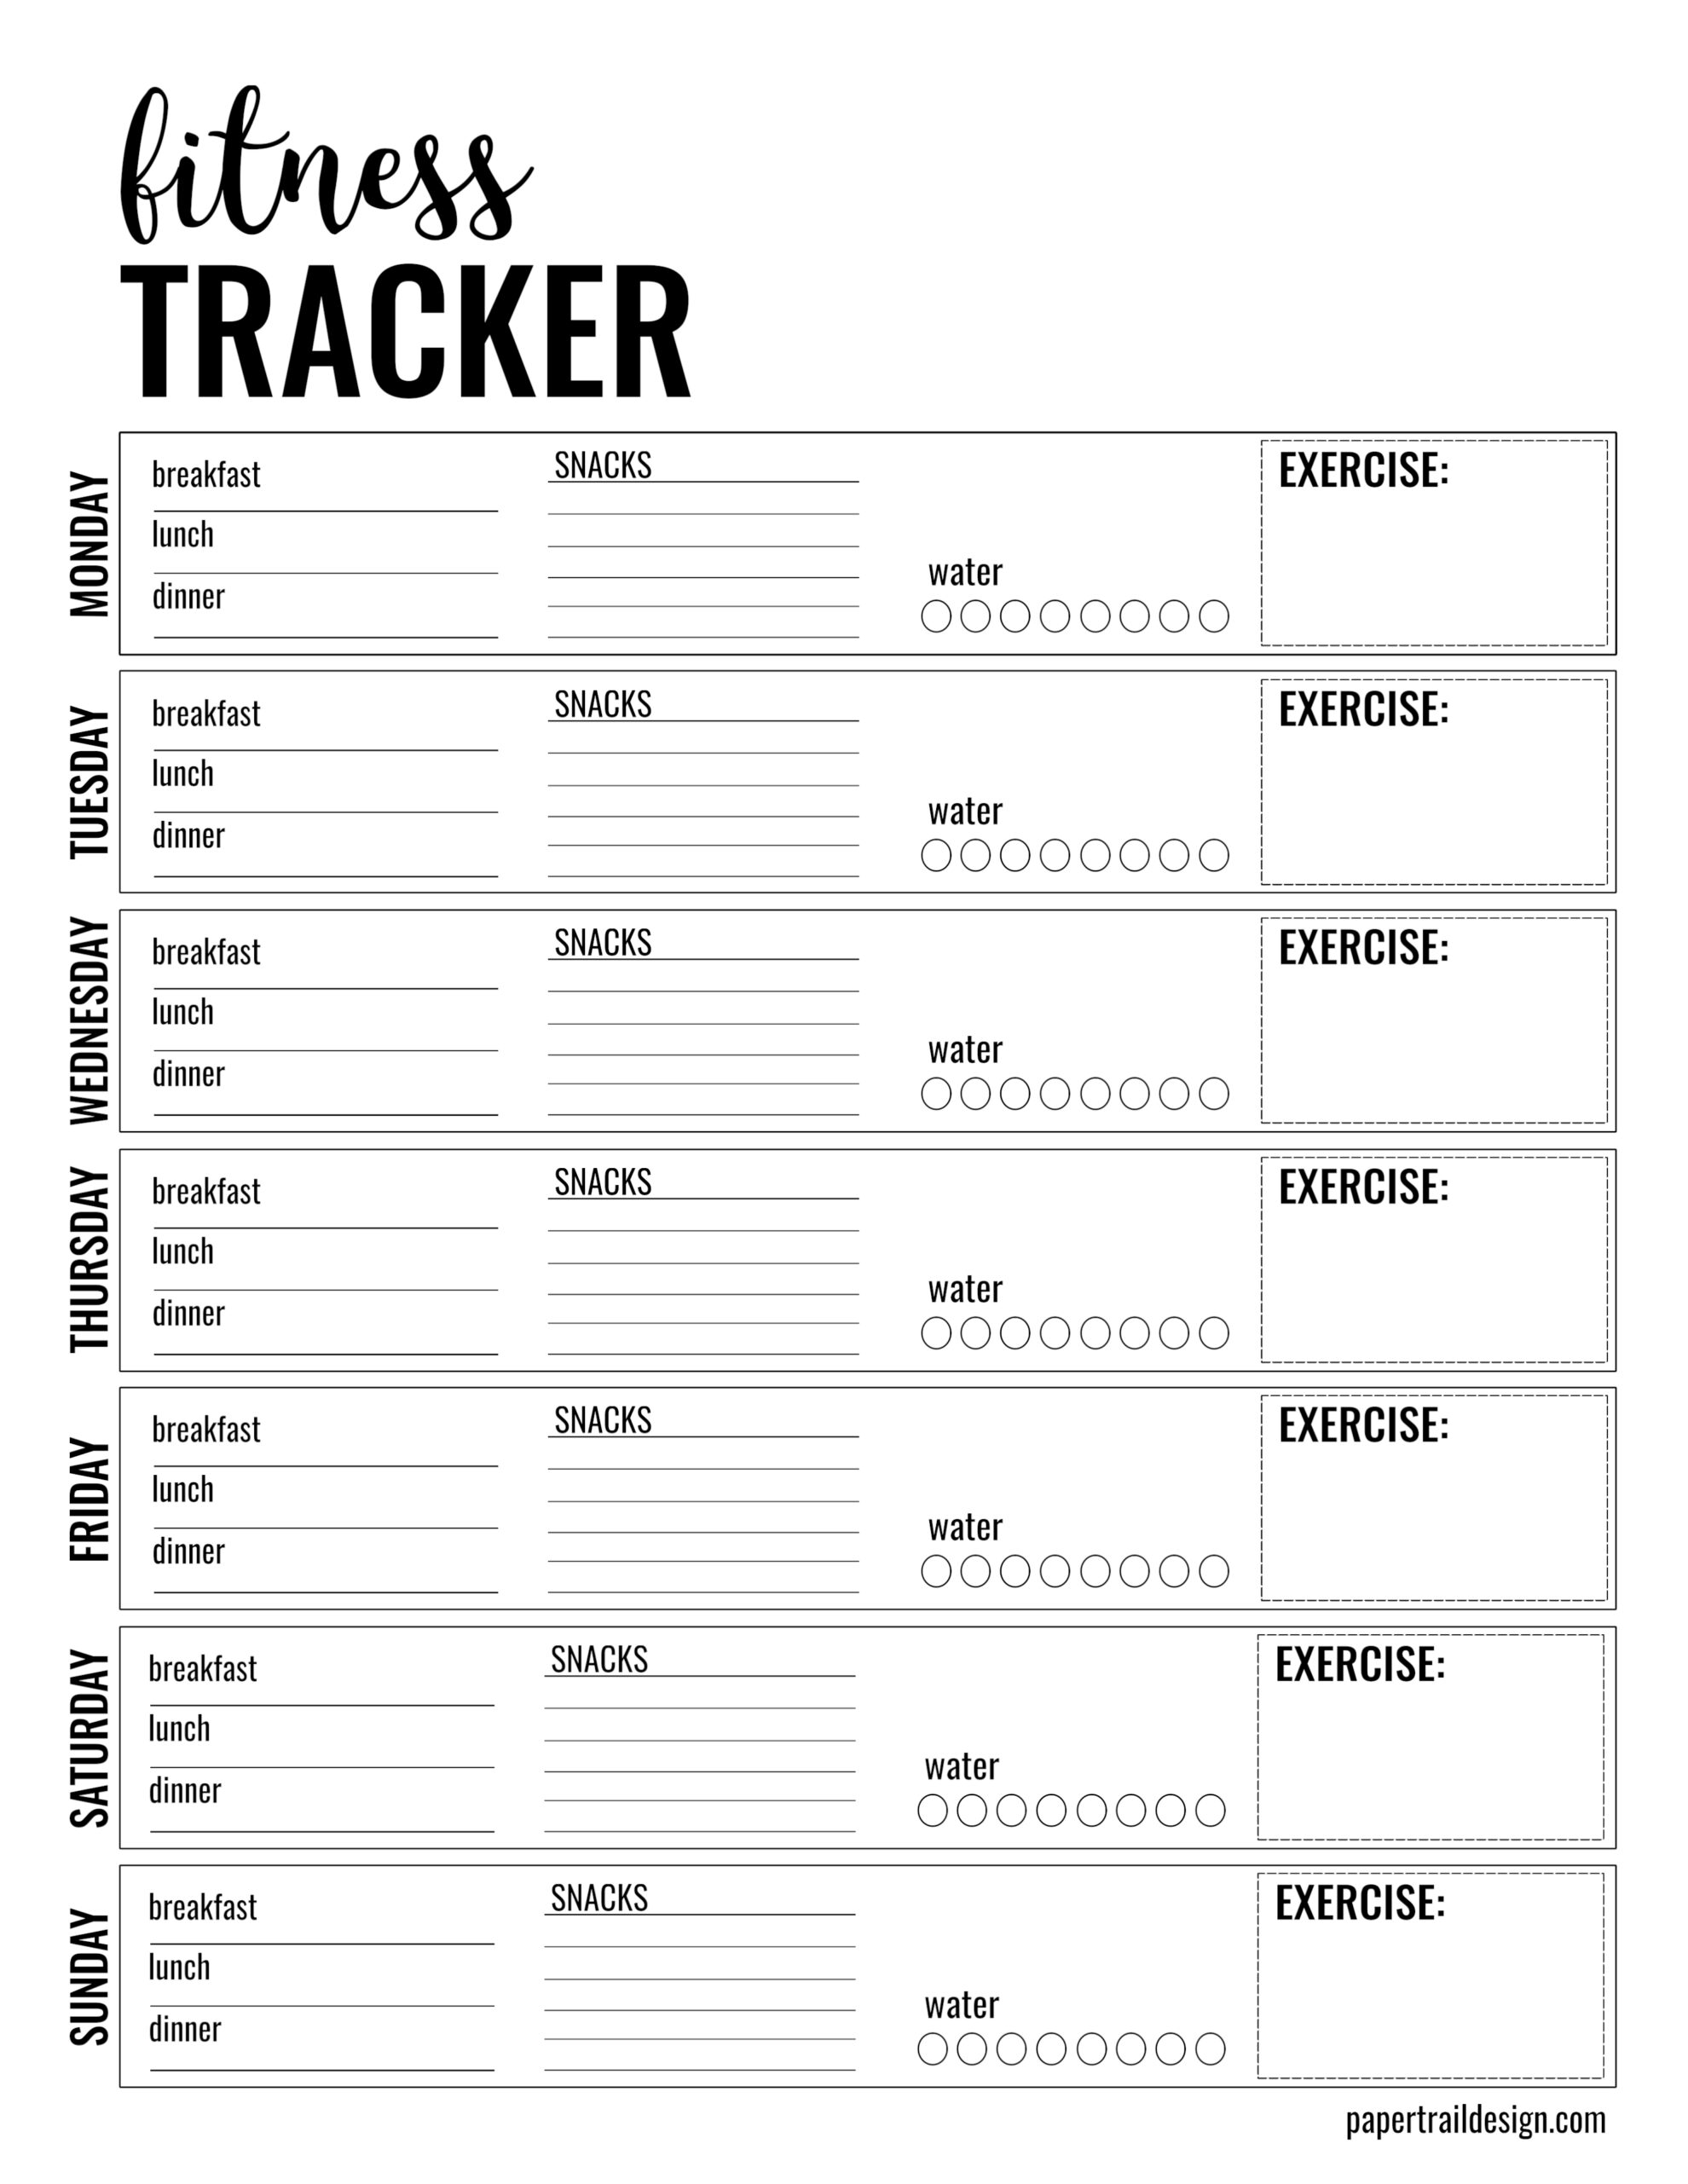 Health Fitness Tracker Free Printable Planner Page Paper Trail Design